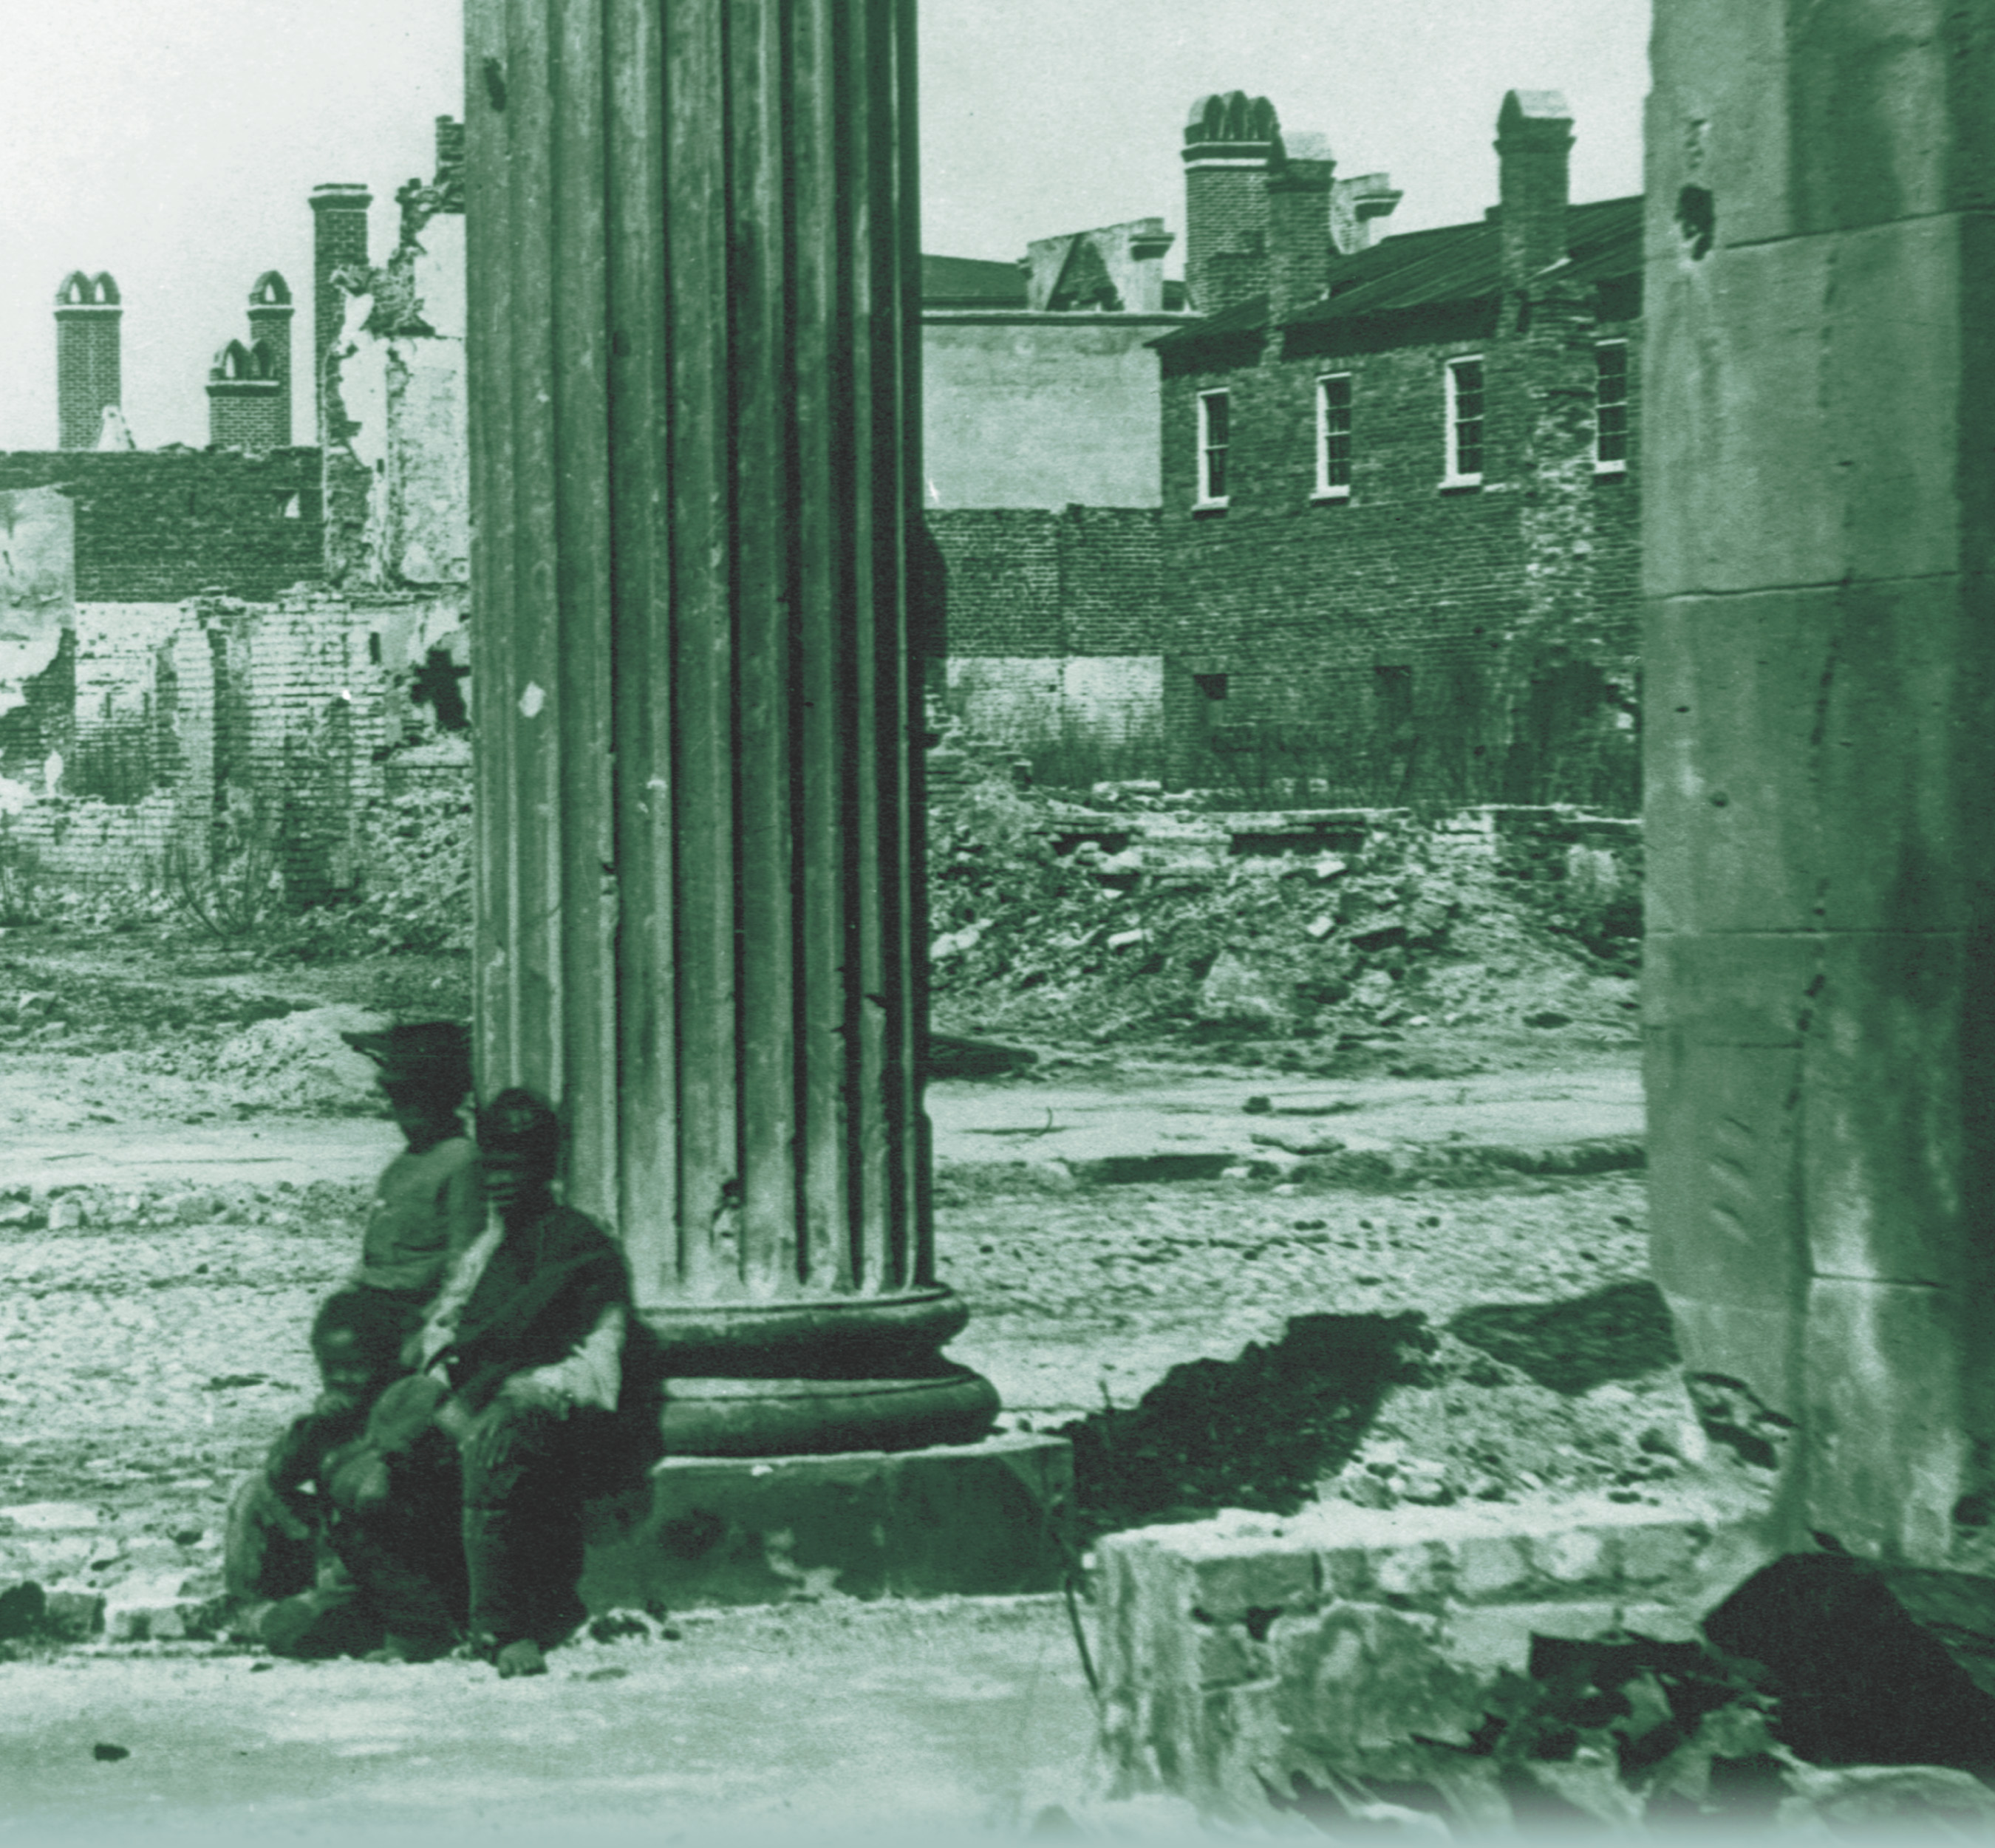 A photo shows African-American children leaning against a plantation house's column, near battered, crumbling buildings. A title: Chapter 12, Reconstruction and its Effects.